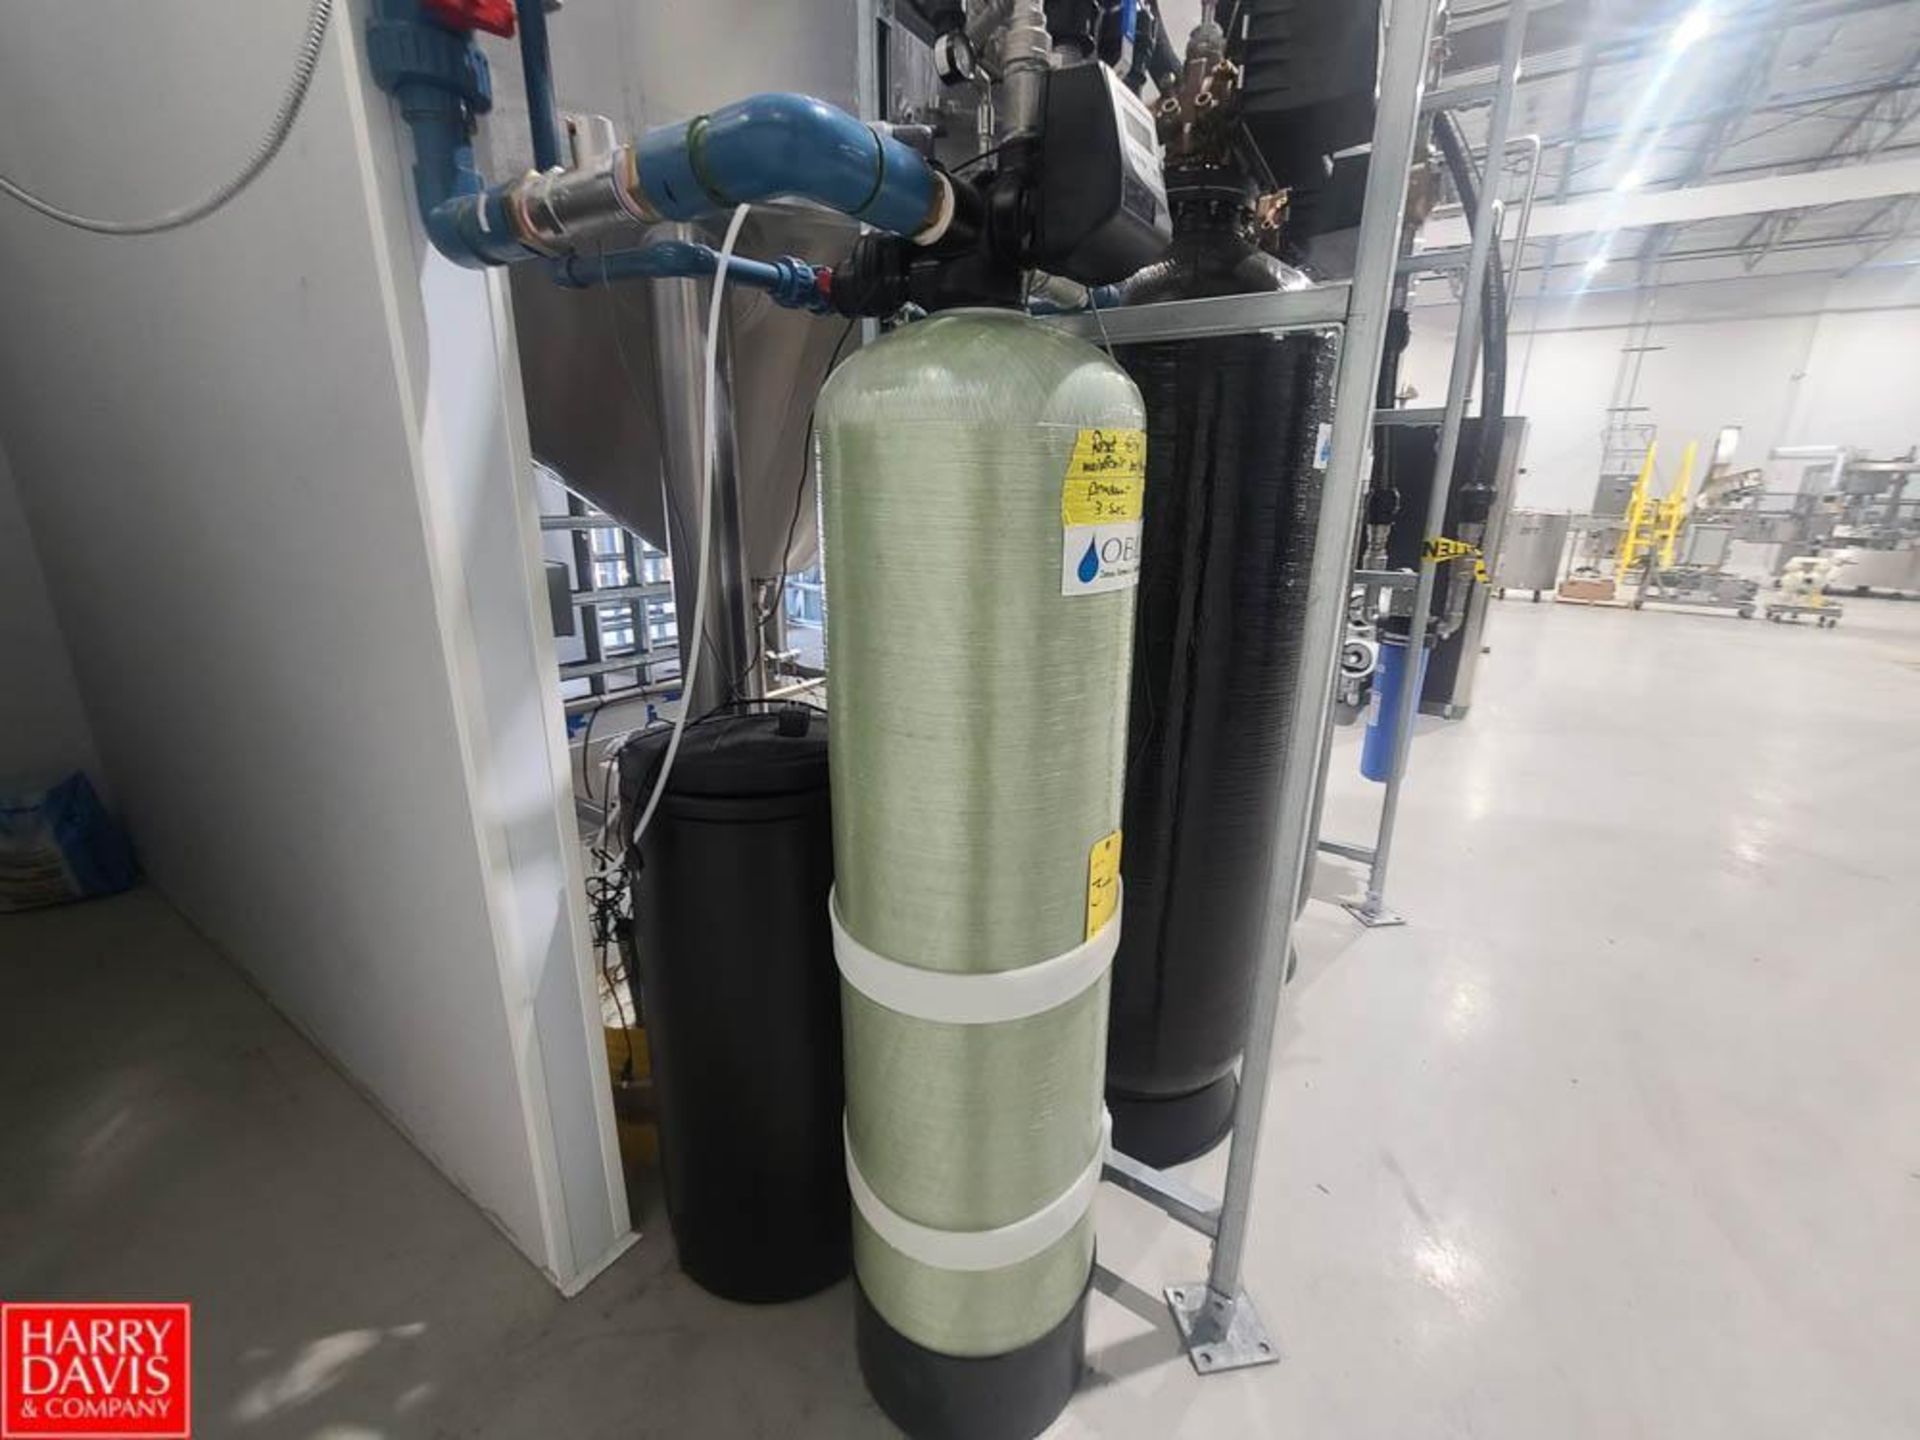 2021 OBLX 2-Tank Water Filter and Softener System - Rigging Fee: $500 - Image 3 of 4